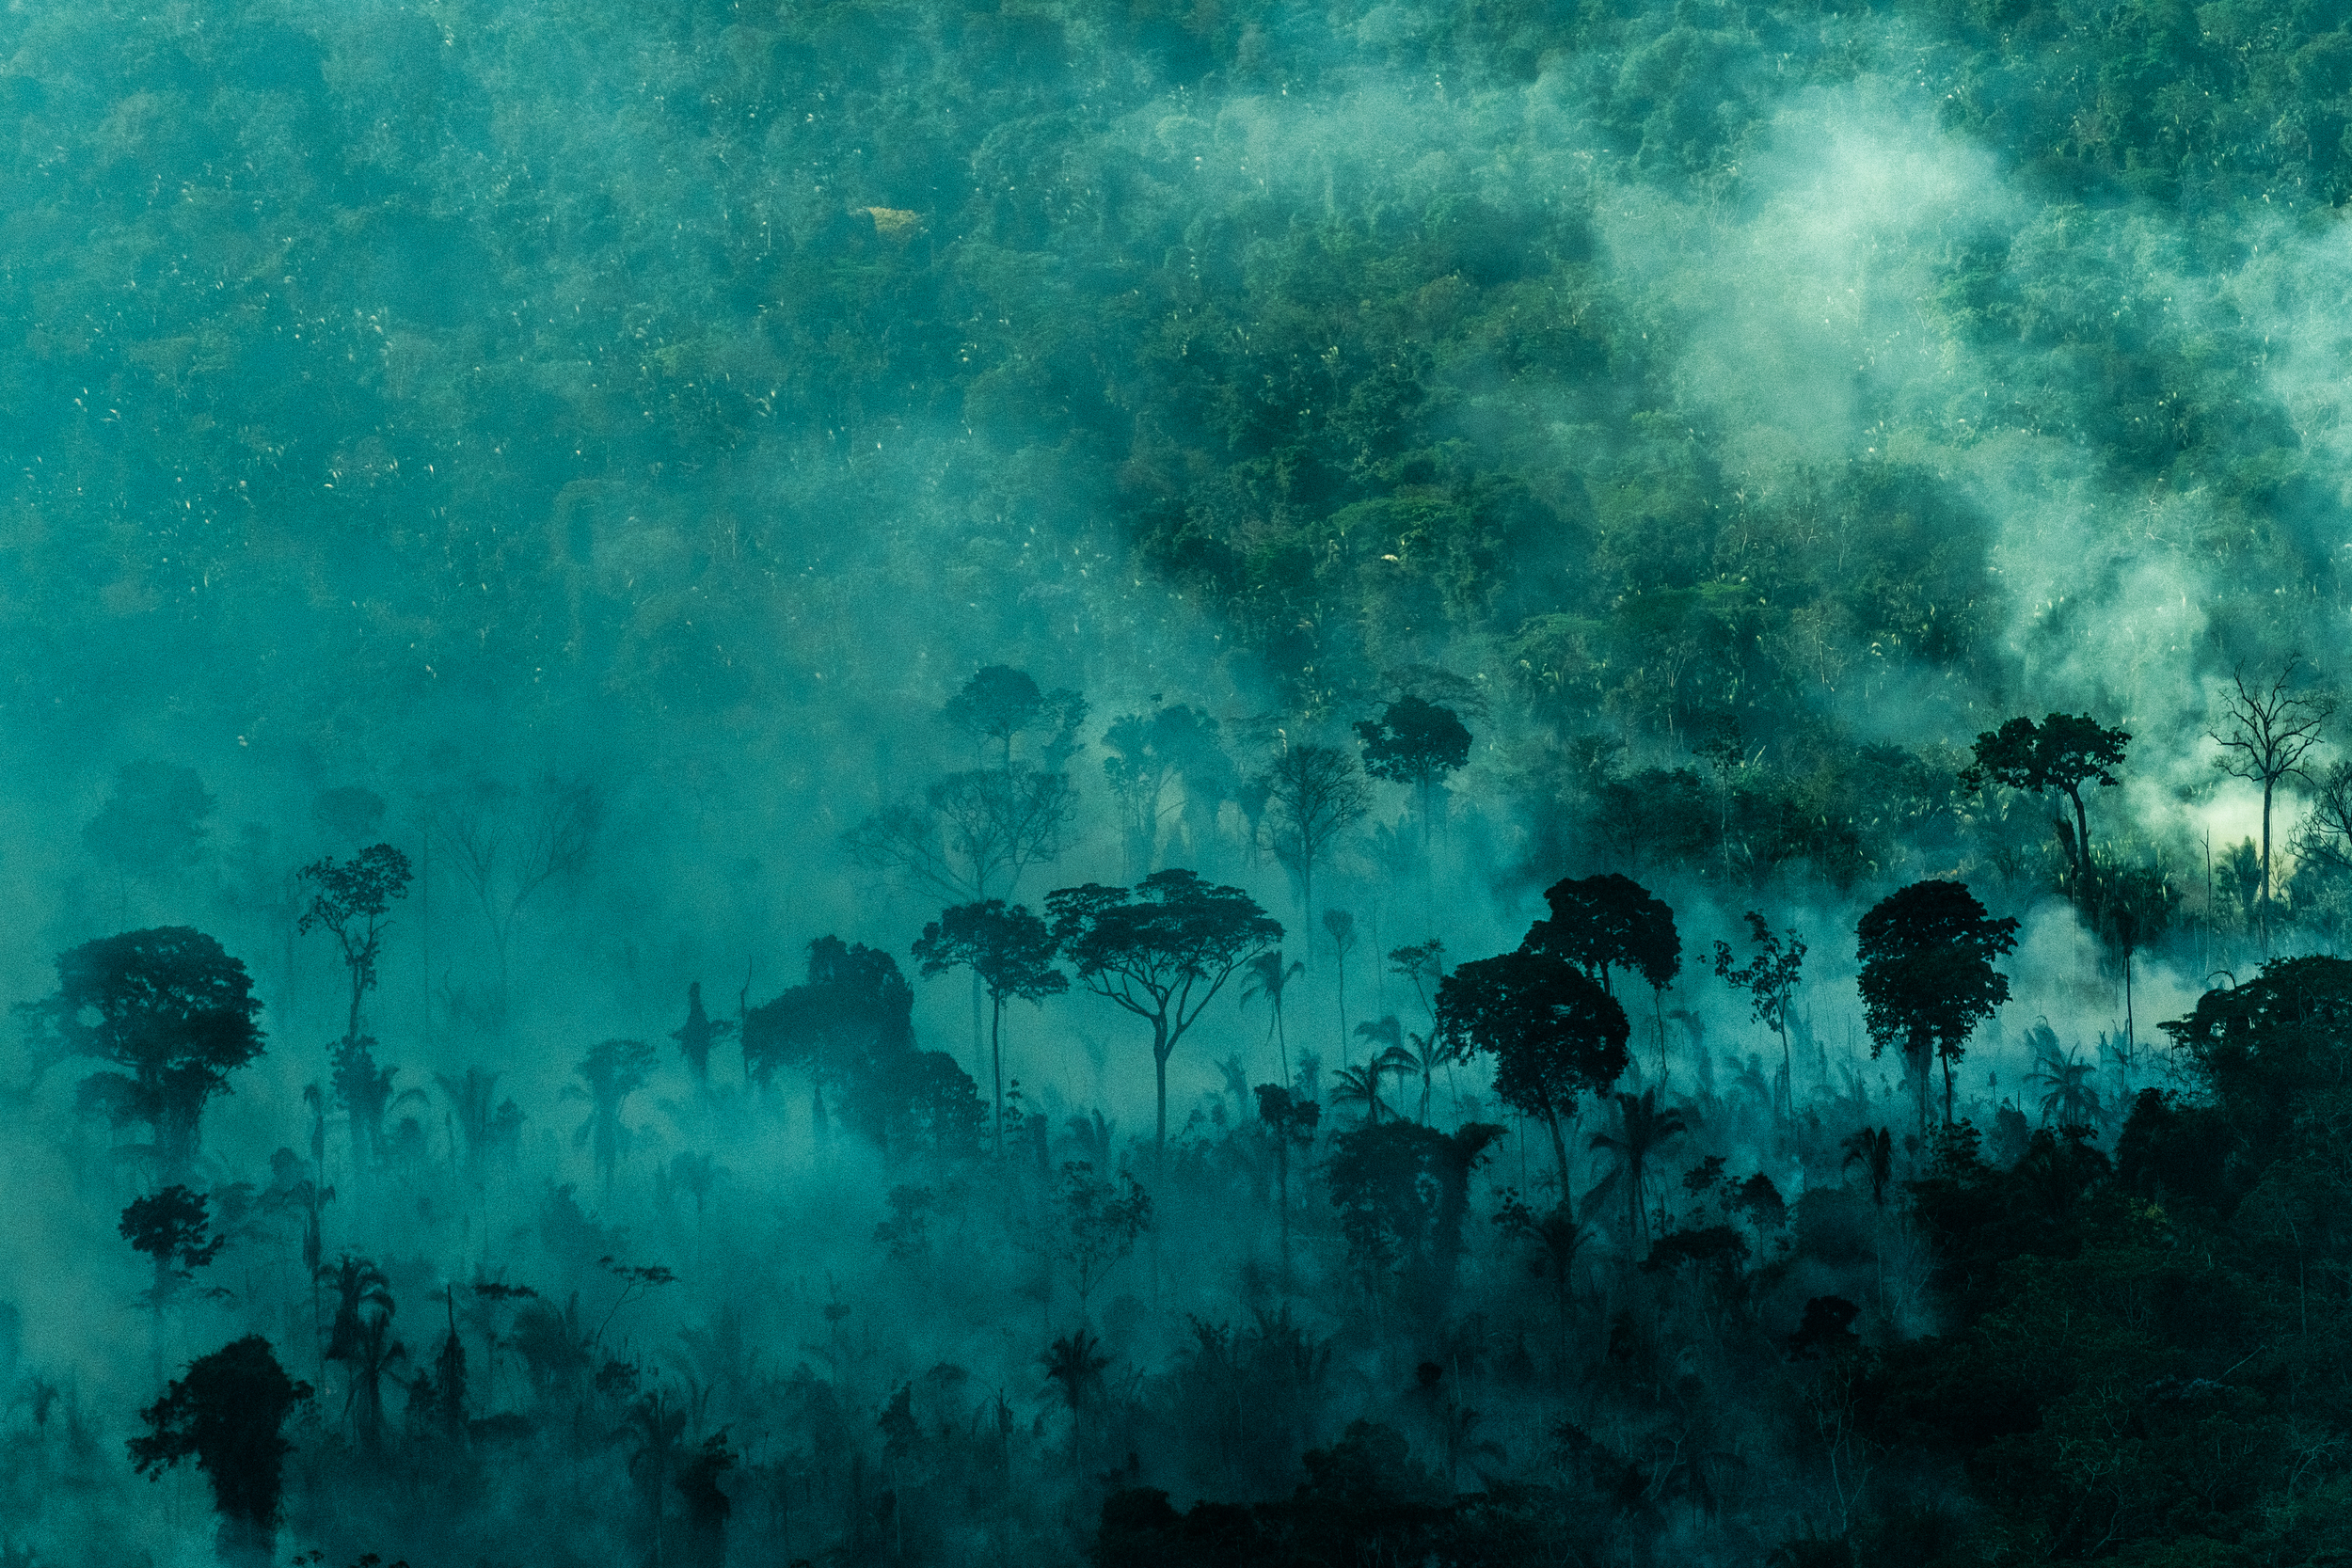 Aerial view of the Amazon rainforest, with smoke drifting between the trees.